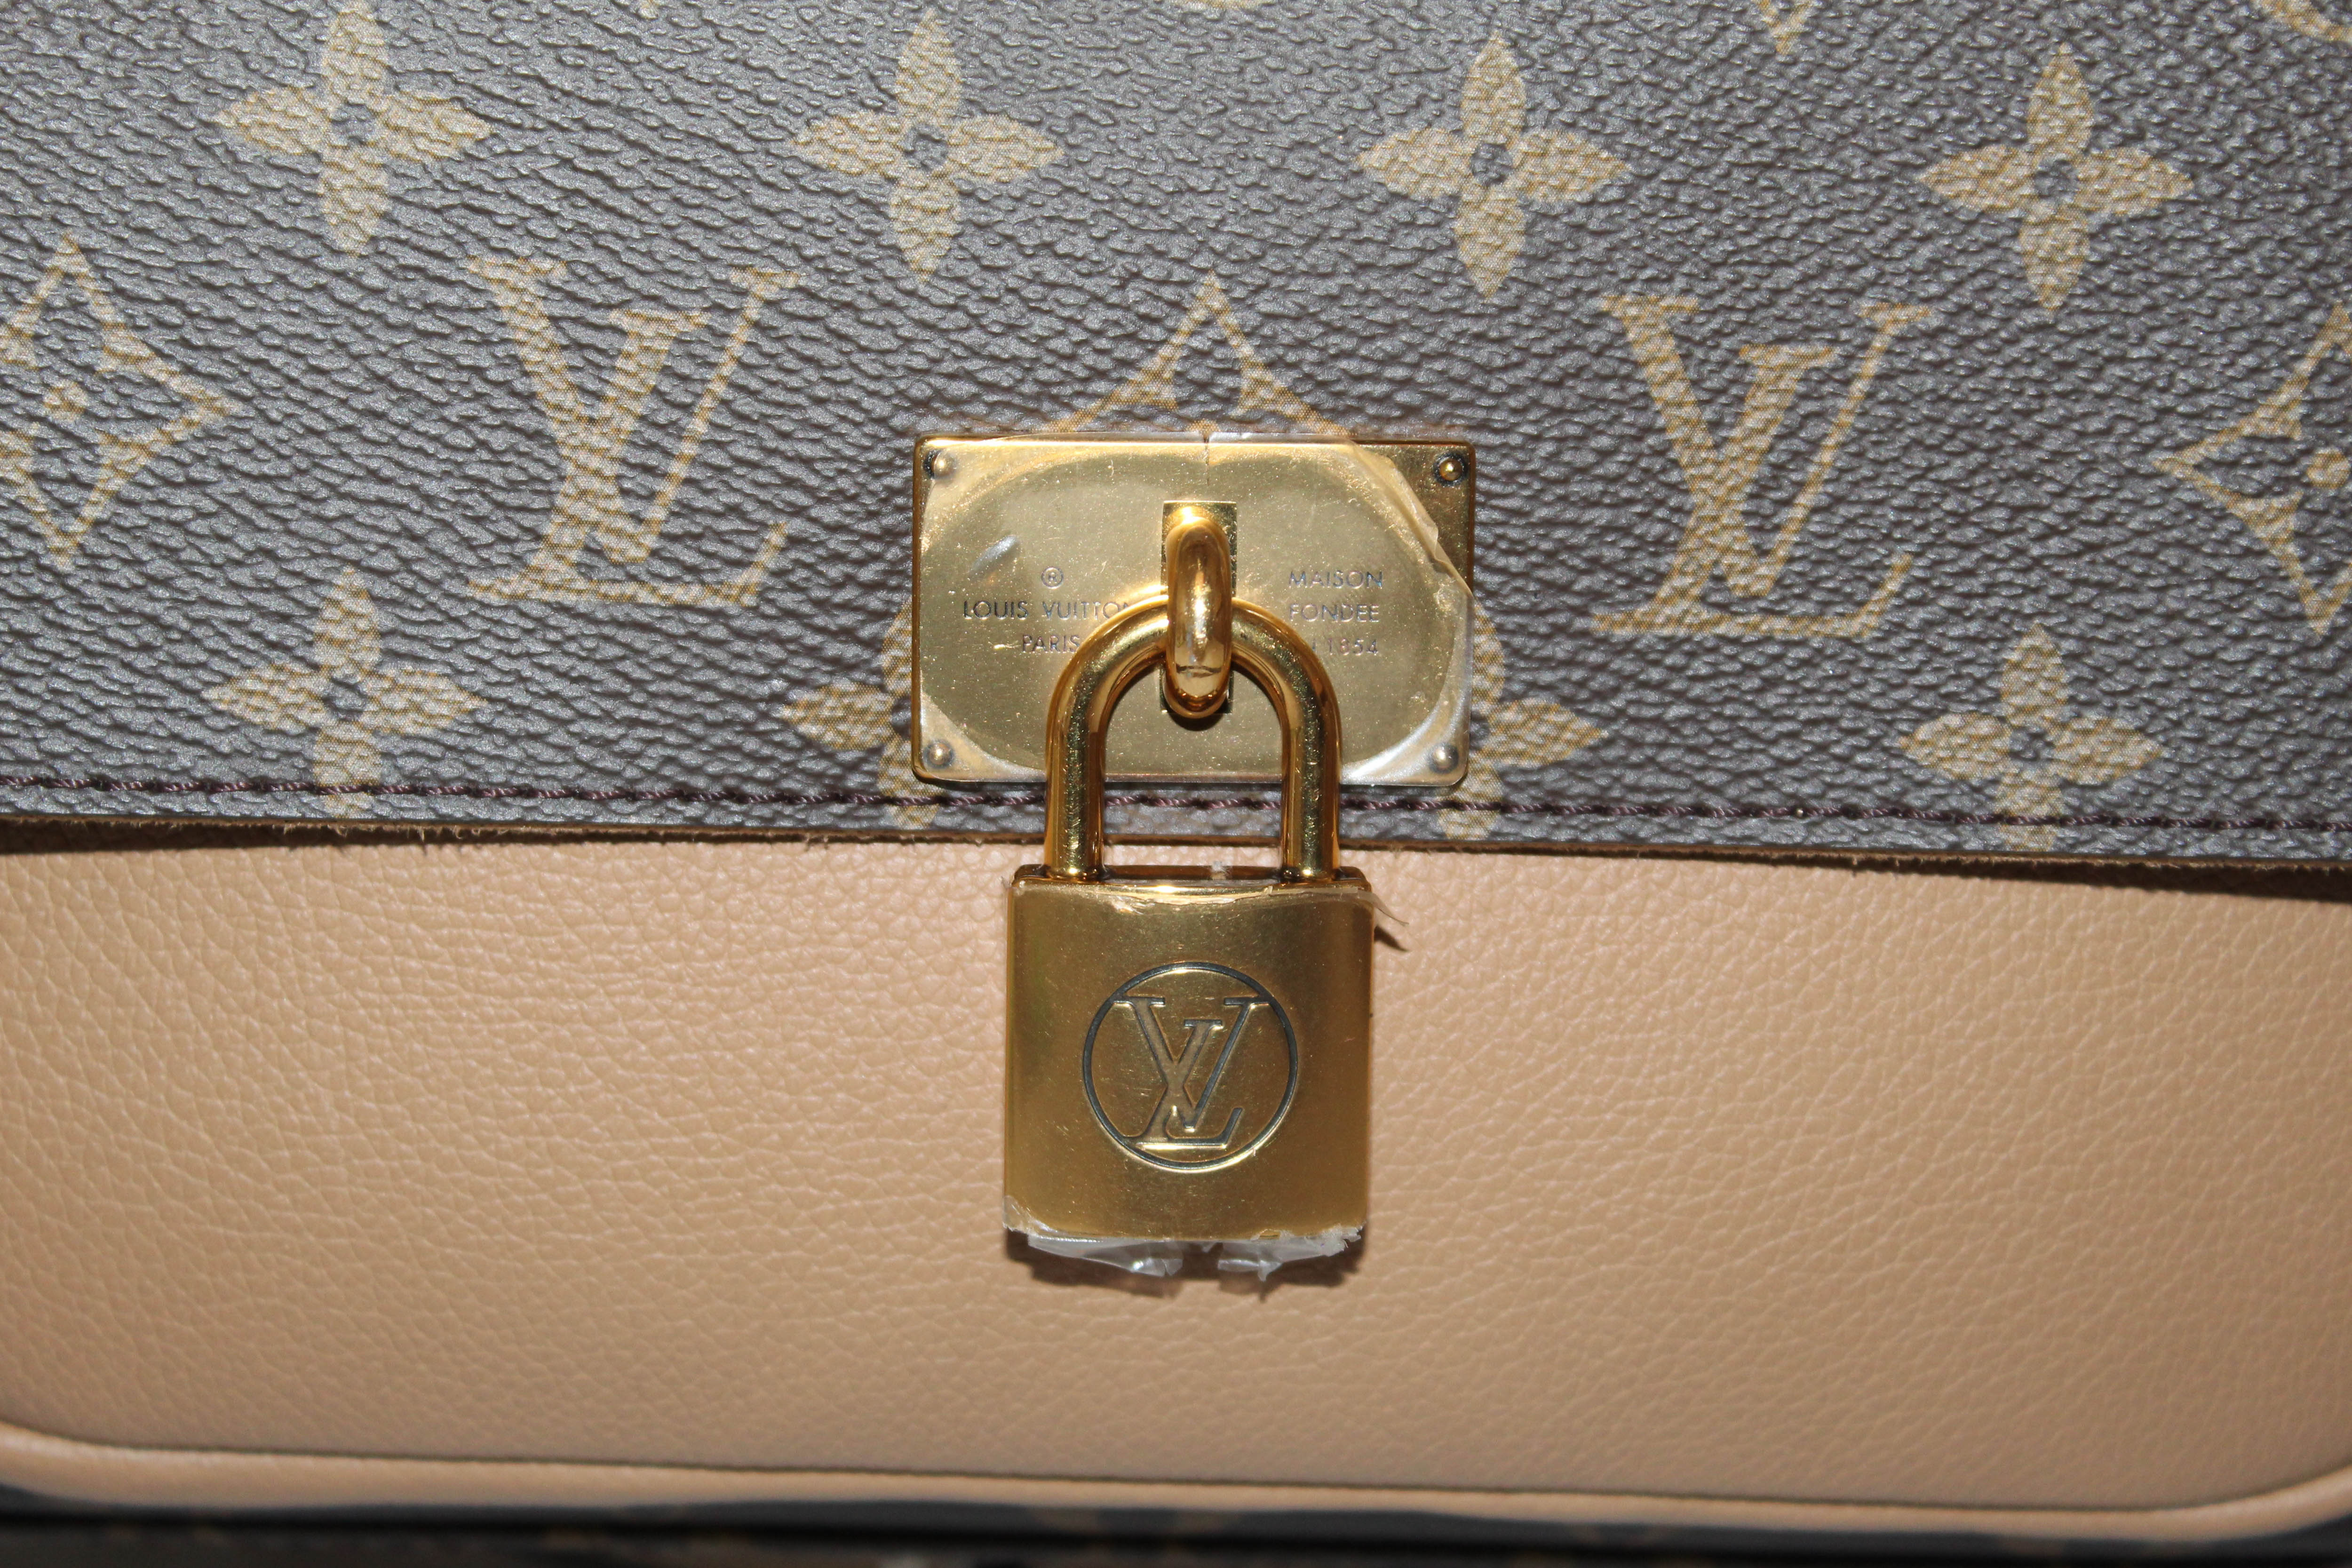 Authentic louis vuitton marignan with receipt like new for Sale in